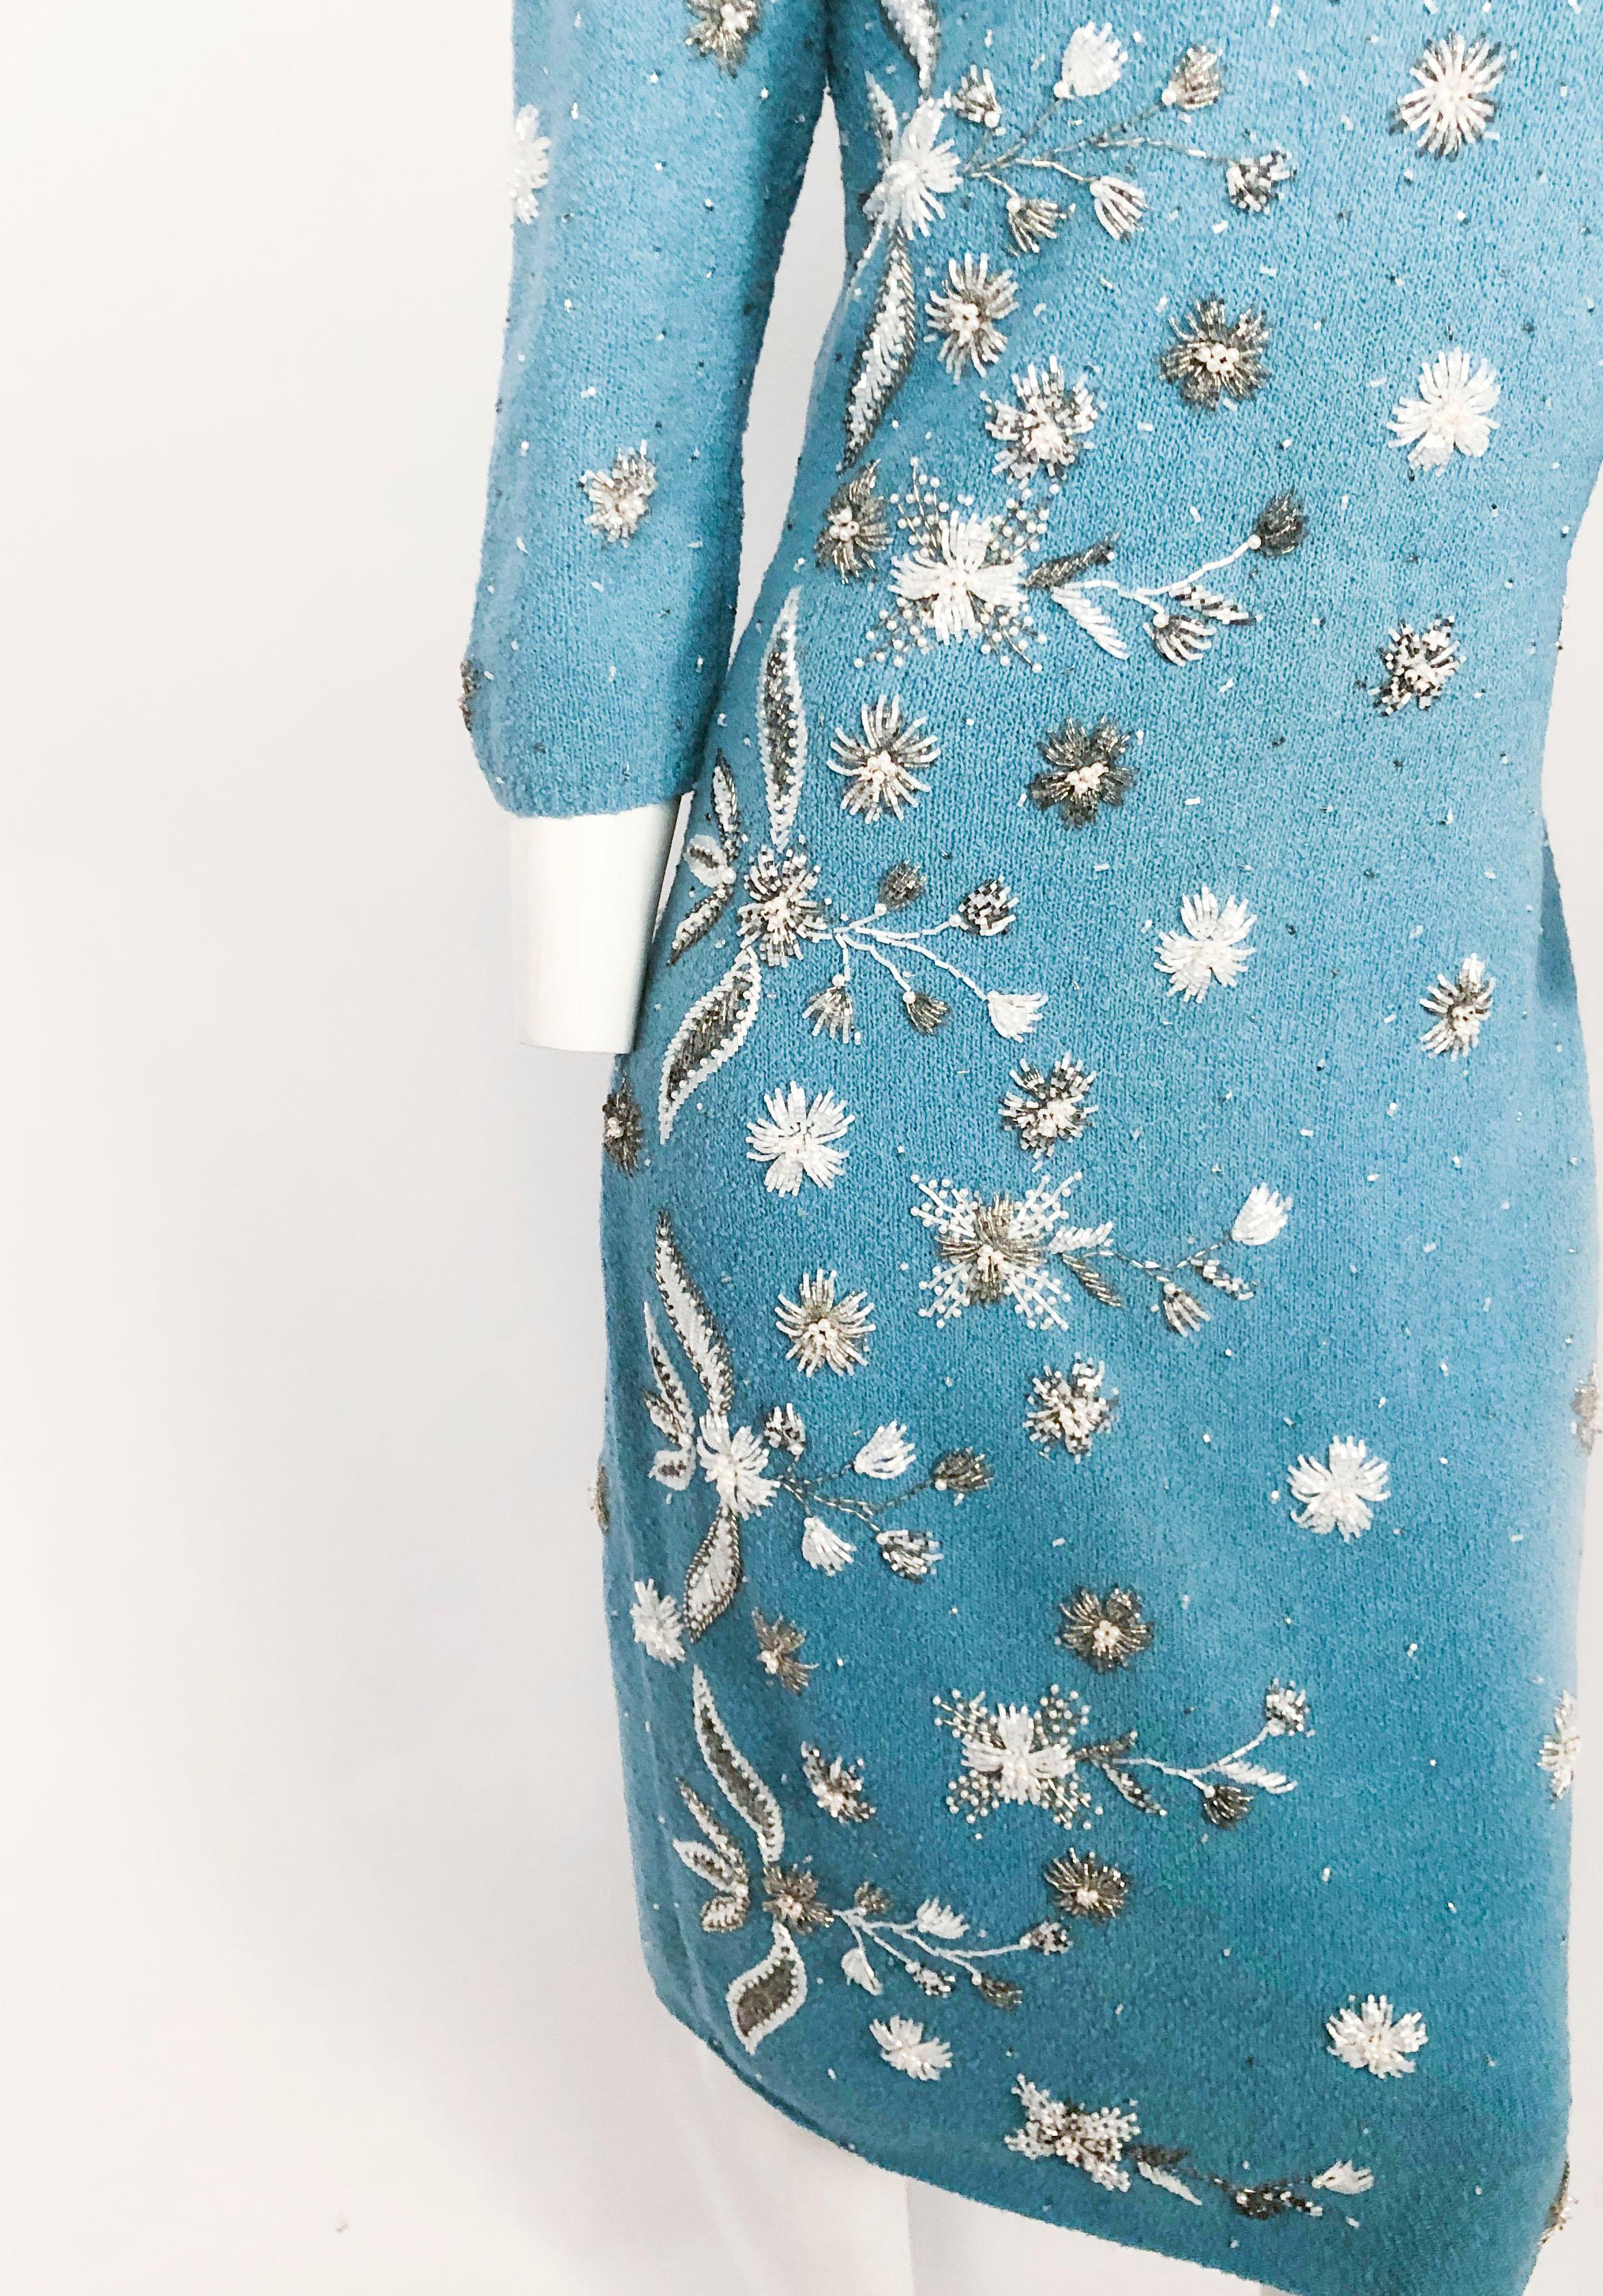 1950s Aqua Knit Dress with Hand Beading Accents In Good Condition For Sale In San Francisco, CA